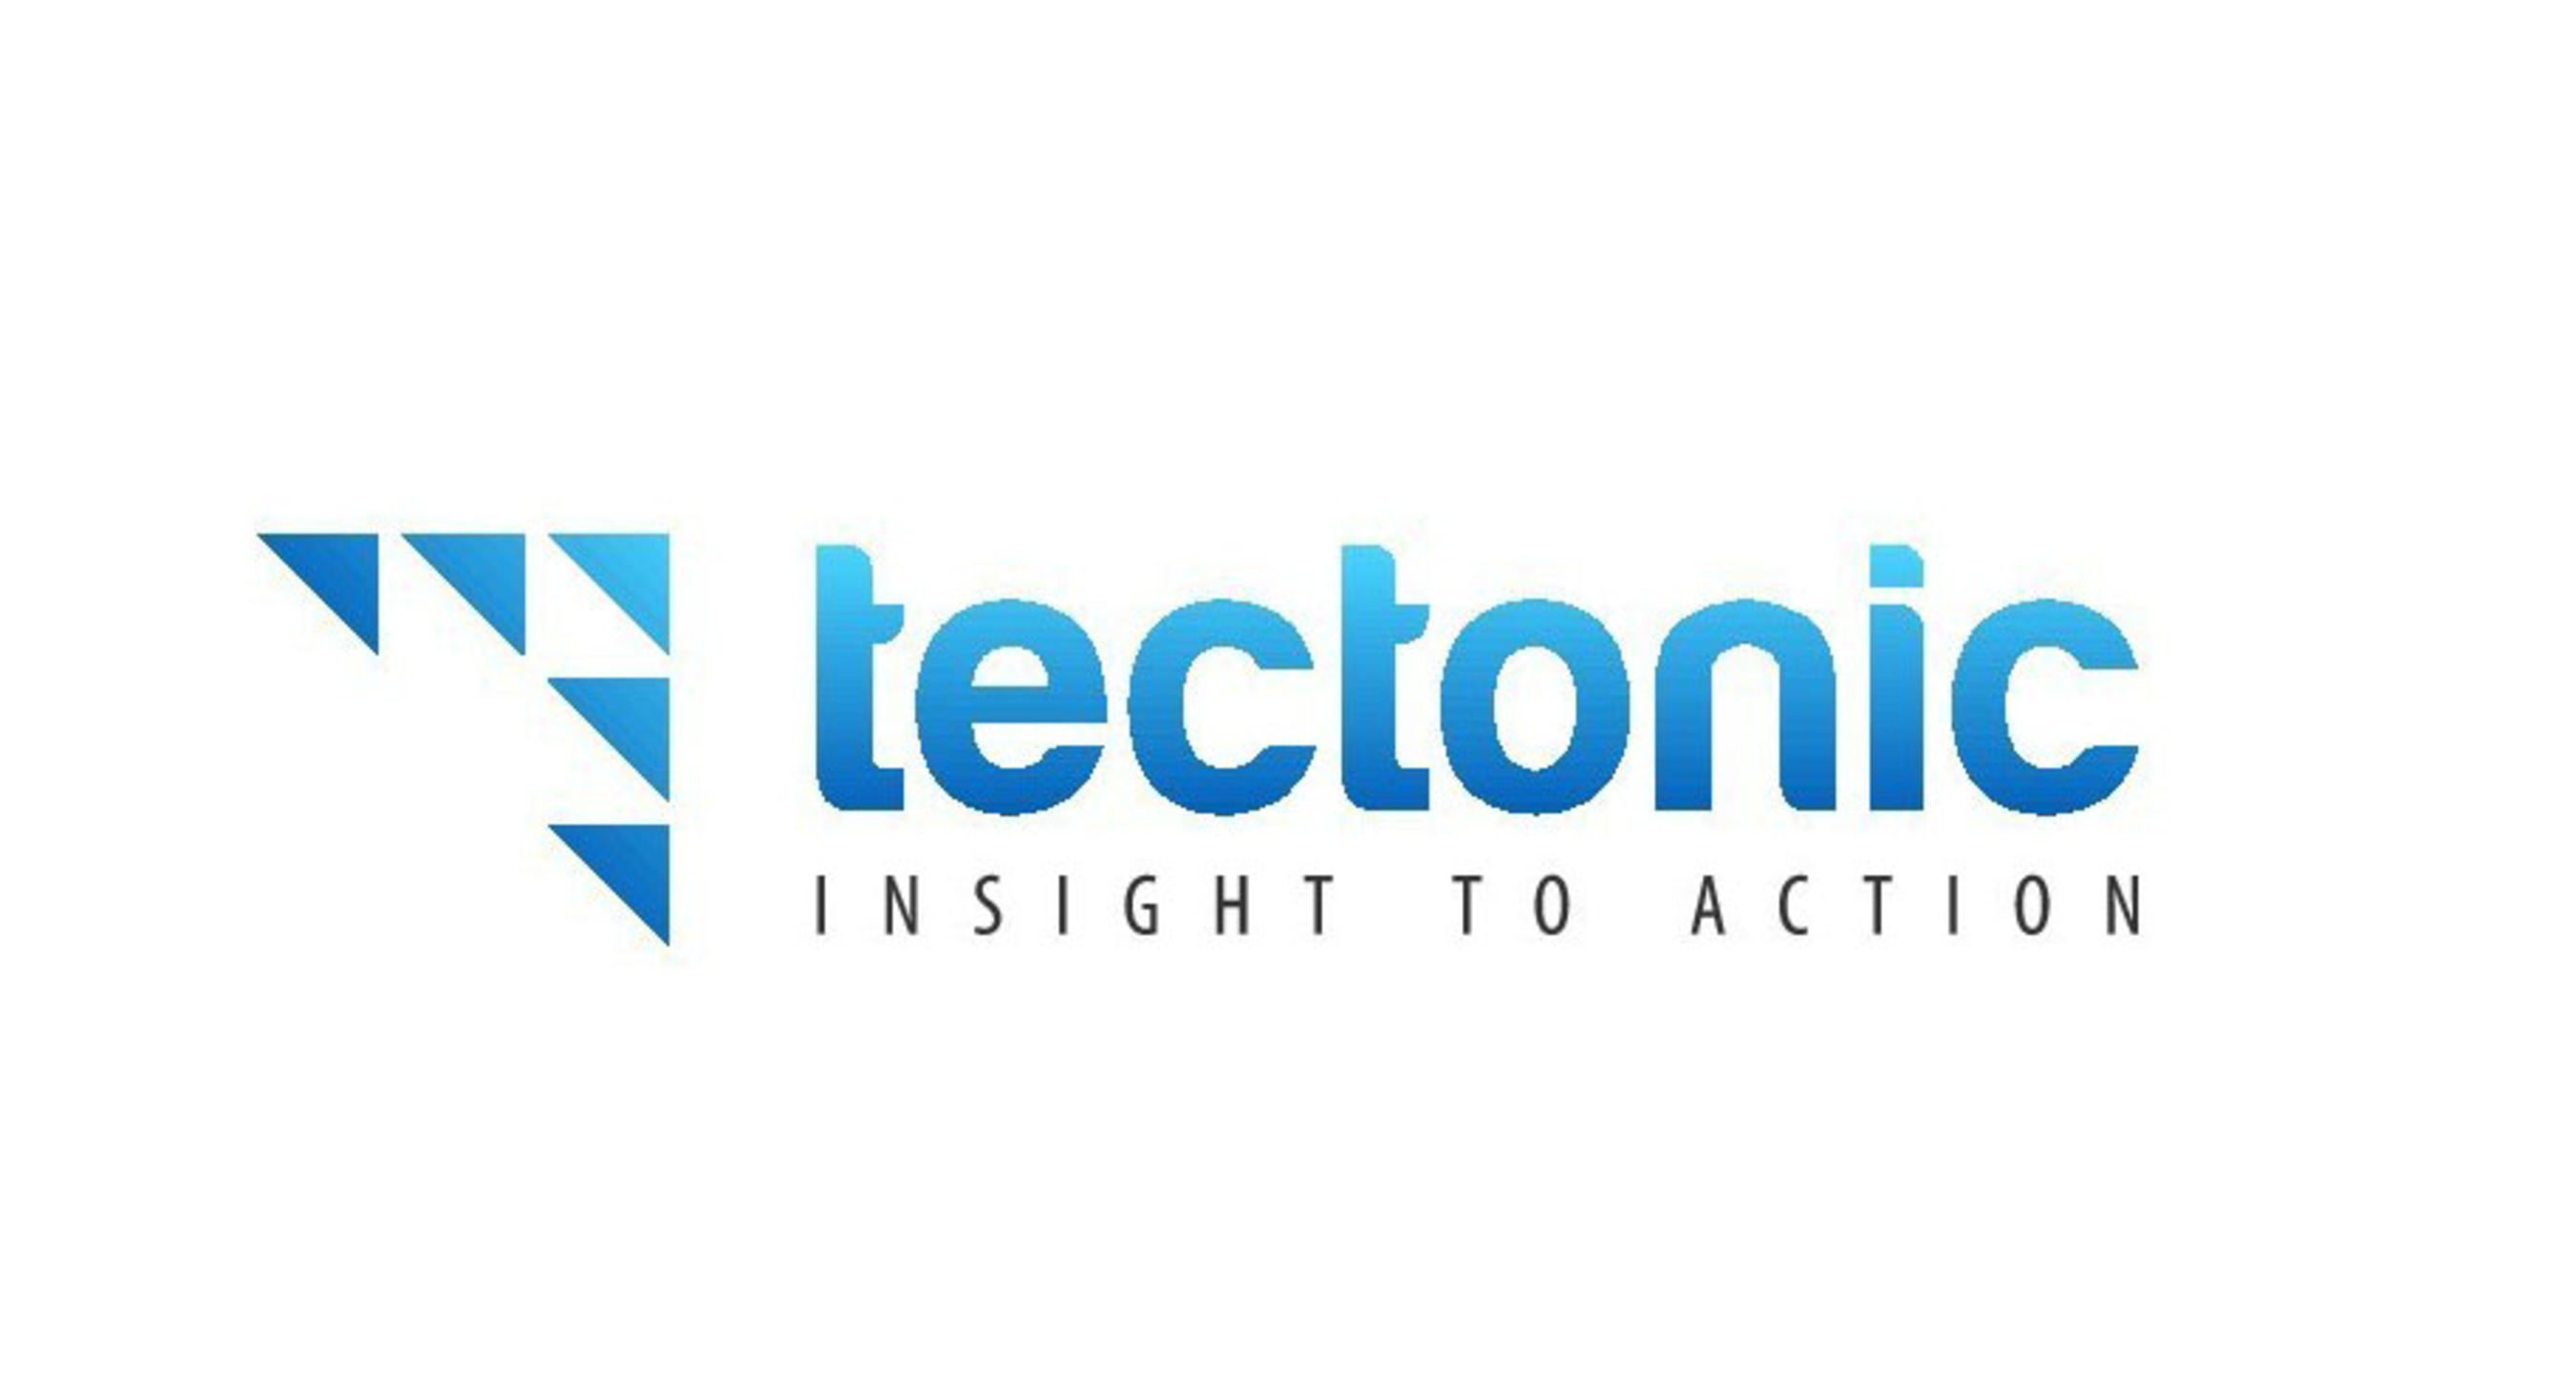 Tectonic is a leading technology and business services company serving mid-sized business to enterprise customers with a focus on Insight to Action automation in the cloud.